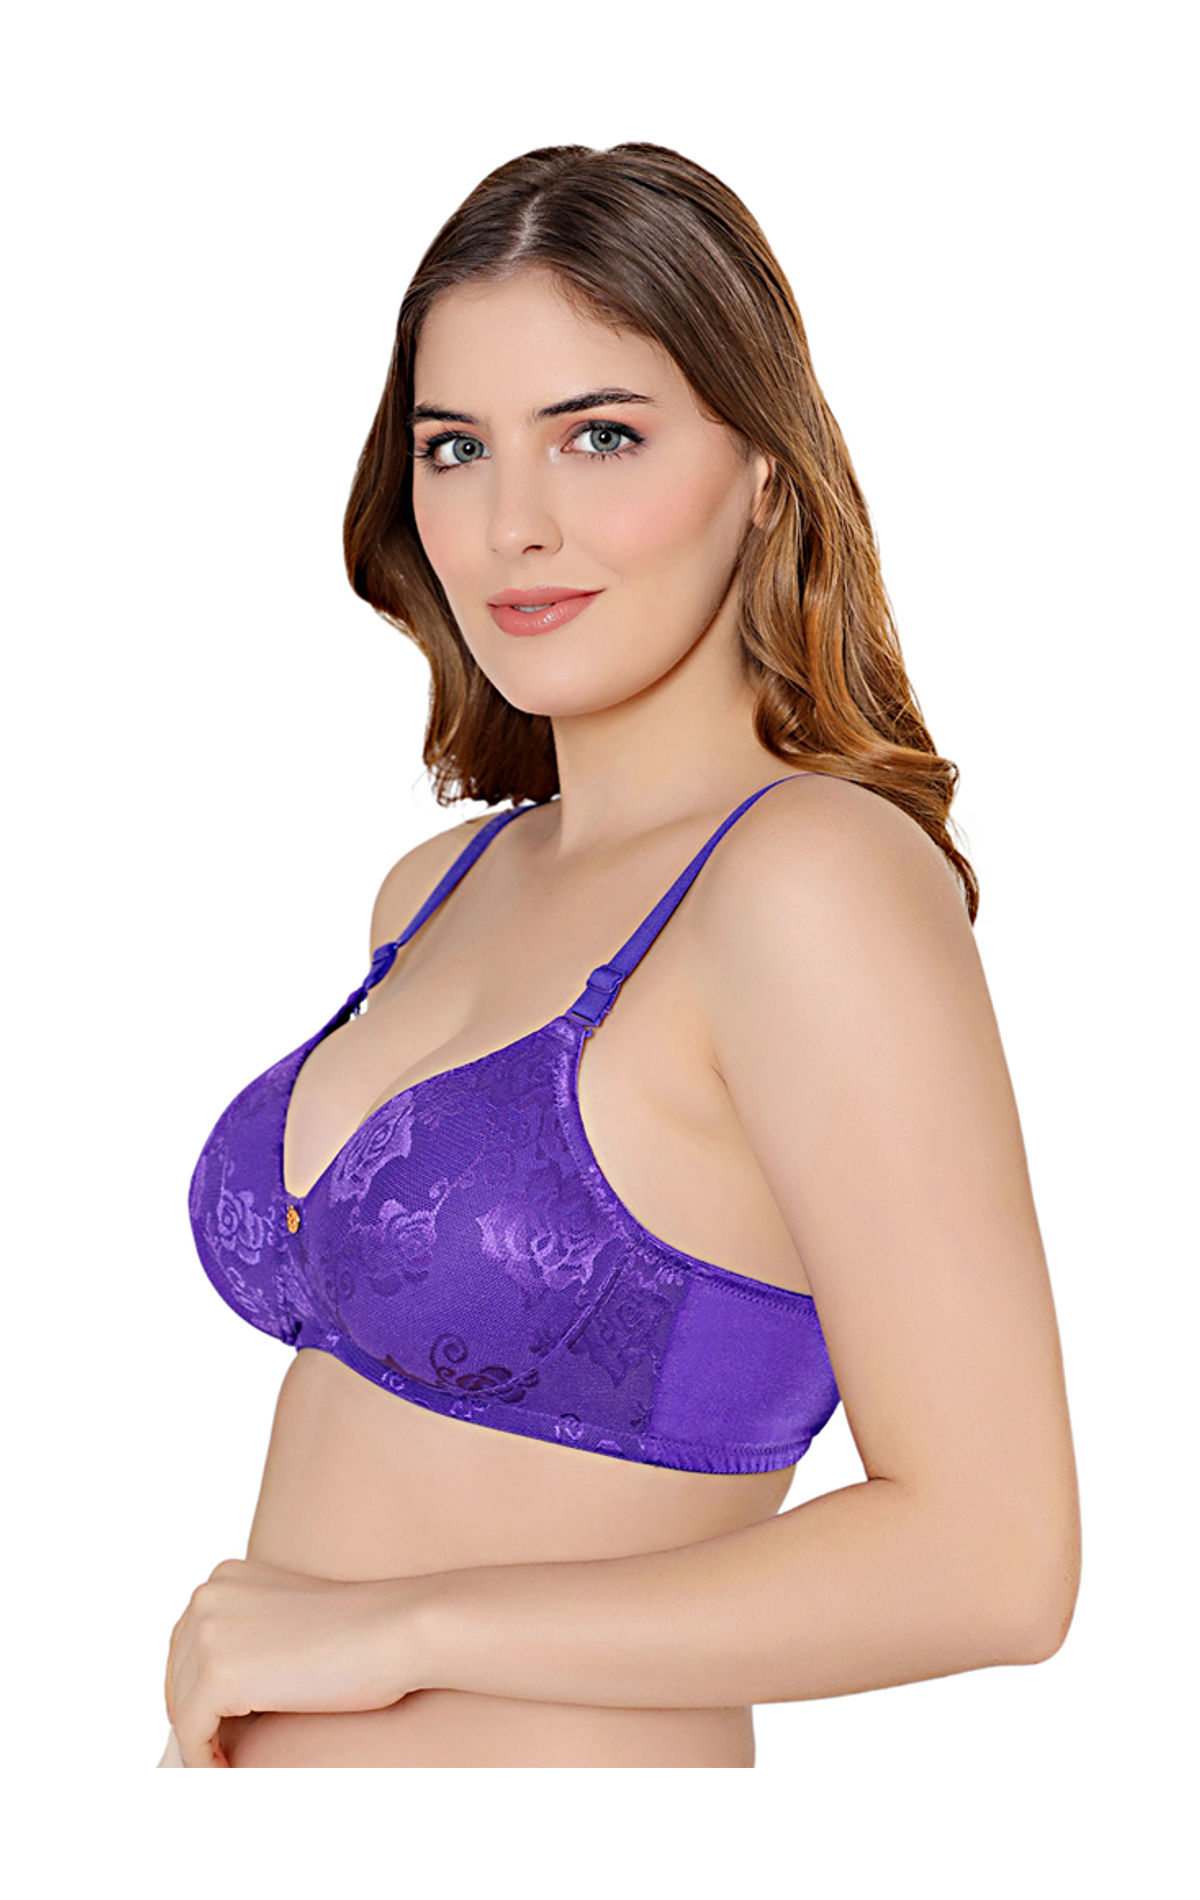 BODYCARE 6407Pu Bridal Bra & Panty Set In Nylon Elastane (Purple) in Sangli  at best price by Archie Collection - Justdial